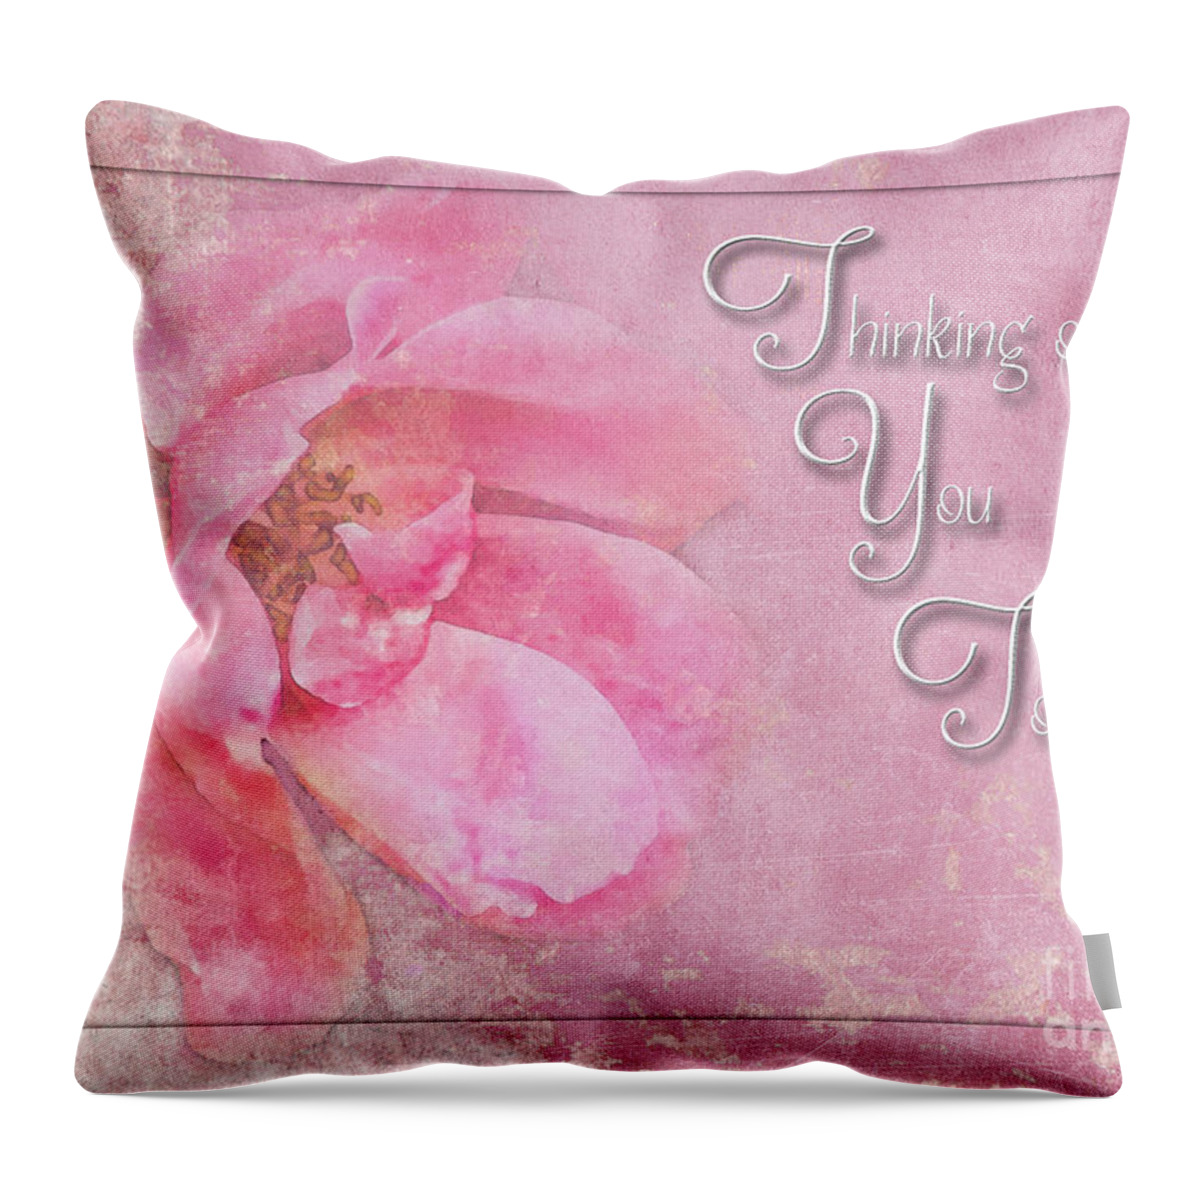 Rose Throw Pillow featuring the photograph Pink Rose Thinking of you greeting card by Debbie Portwood